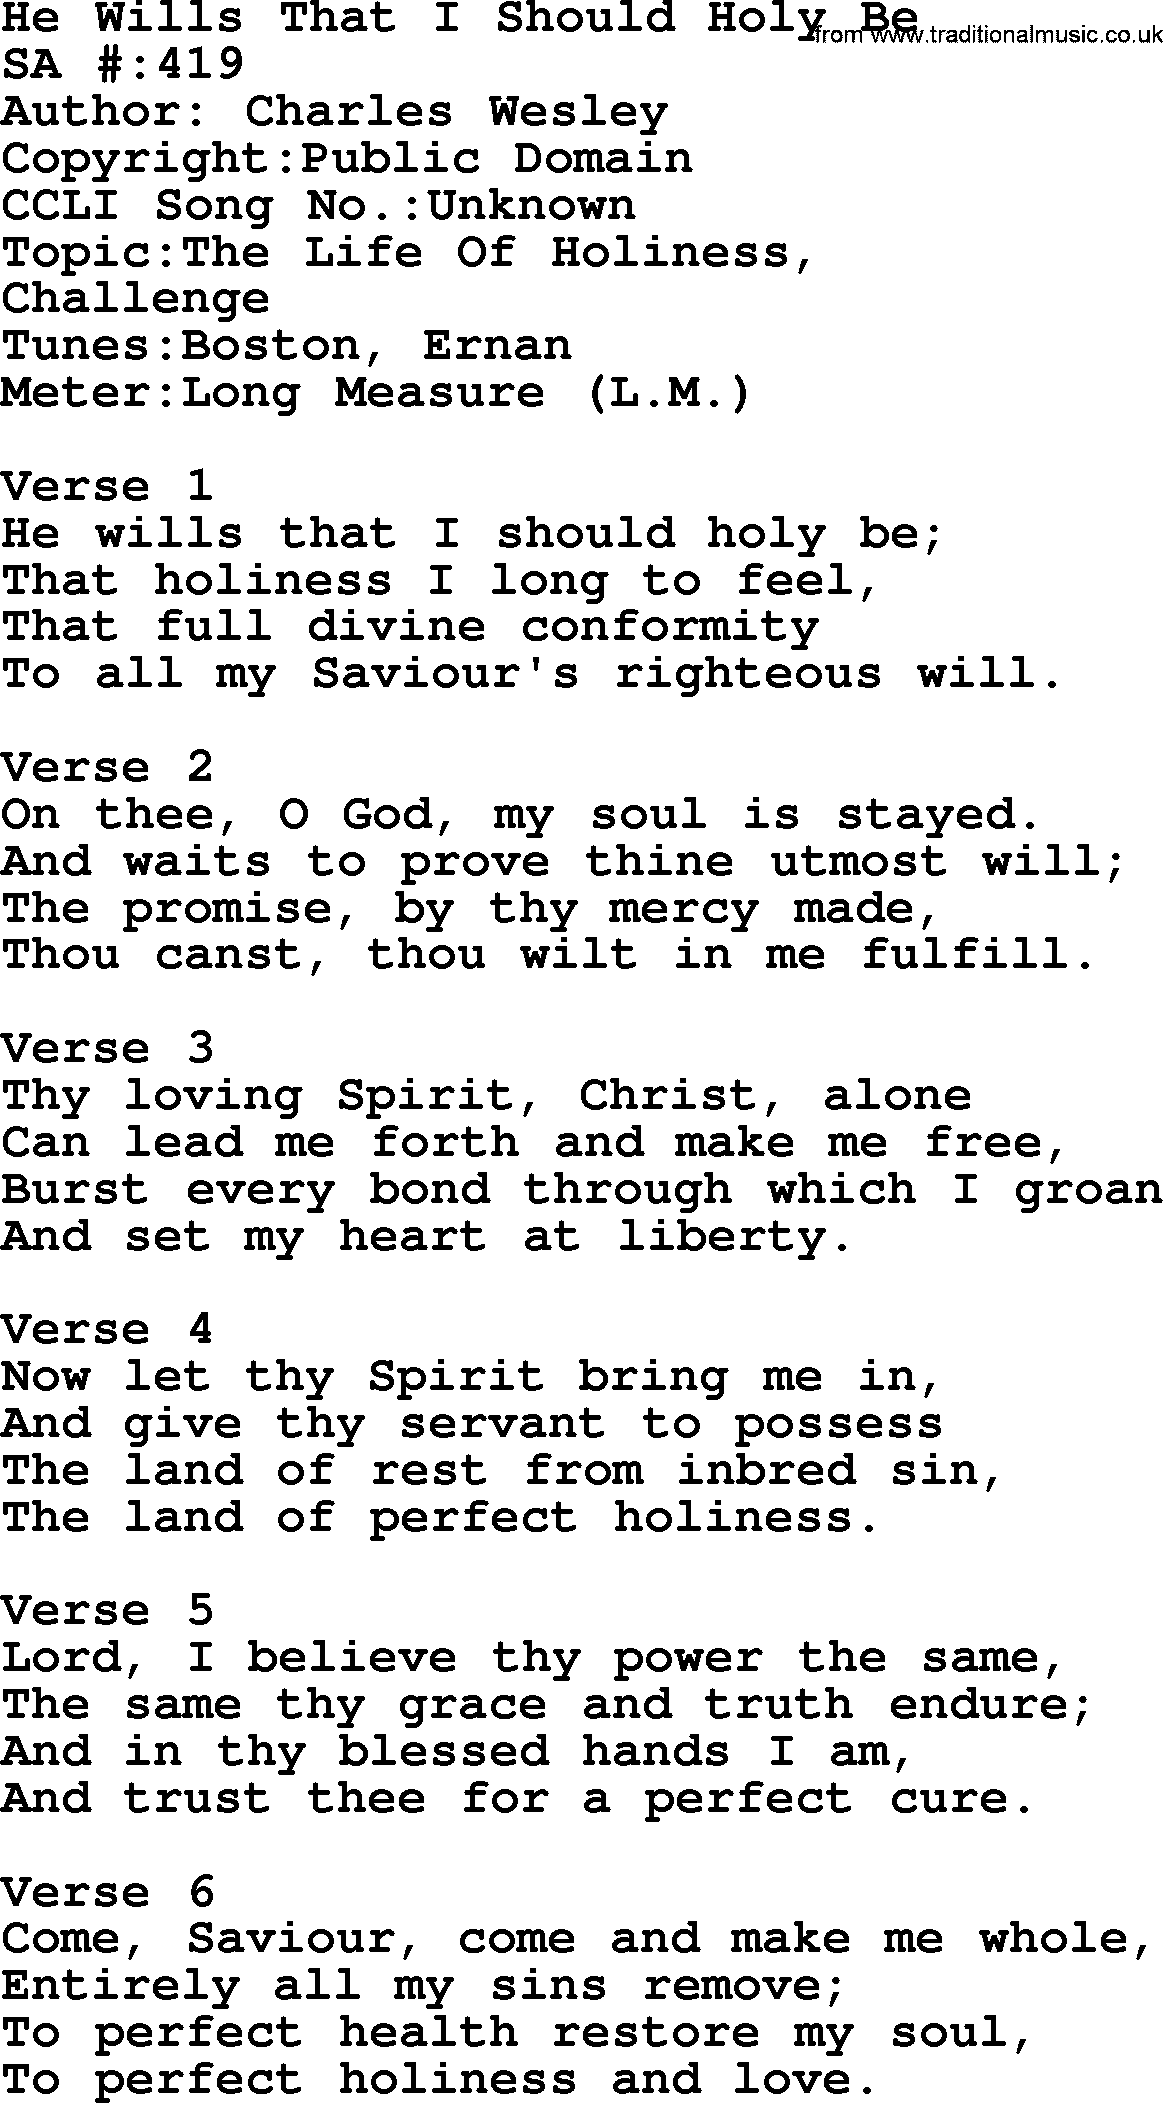 Salvation Army Hymnal, title: He Wills That I Should Holy Be, with lyrics and PDF,